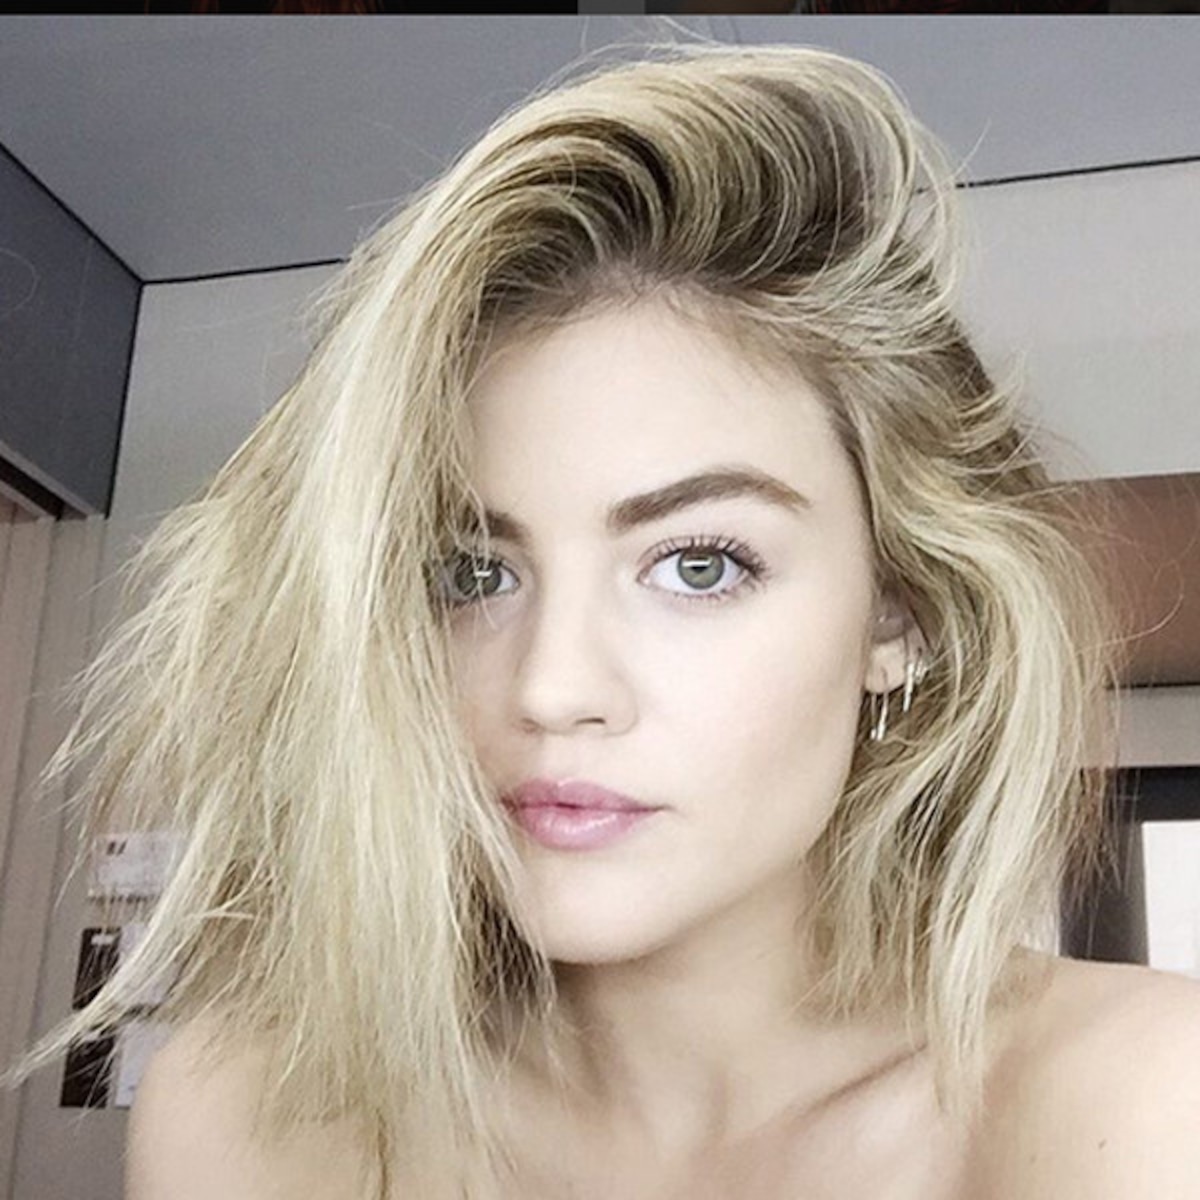 Naked pics of lucy hale